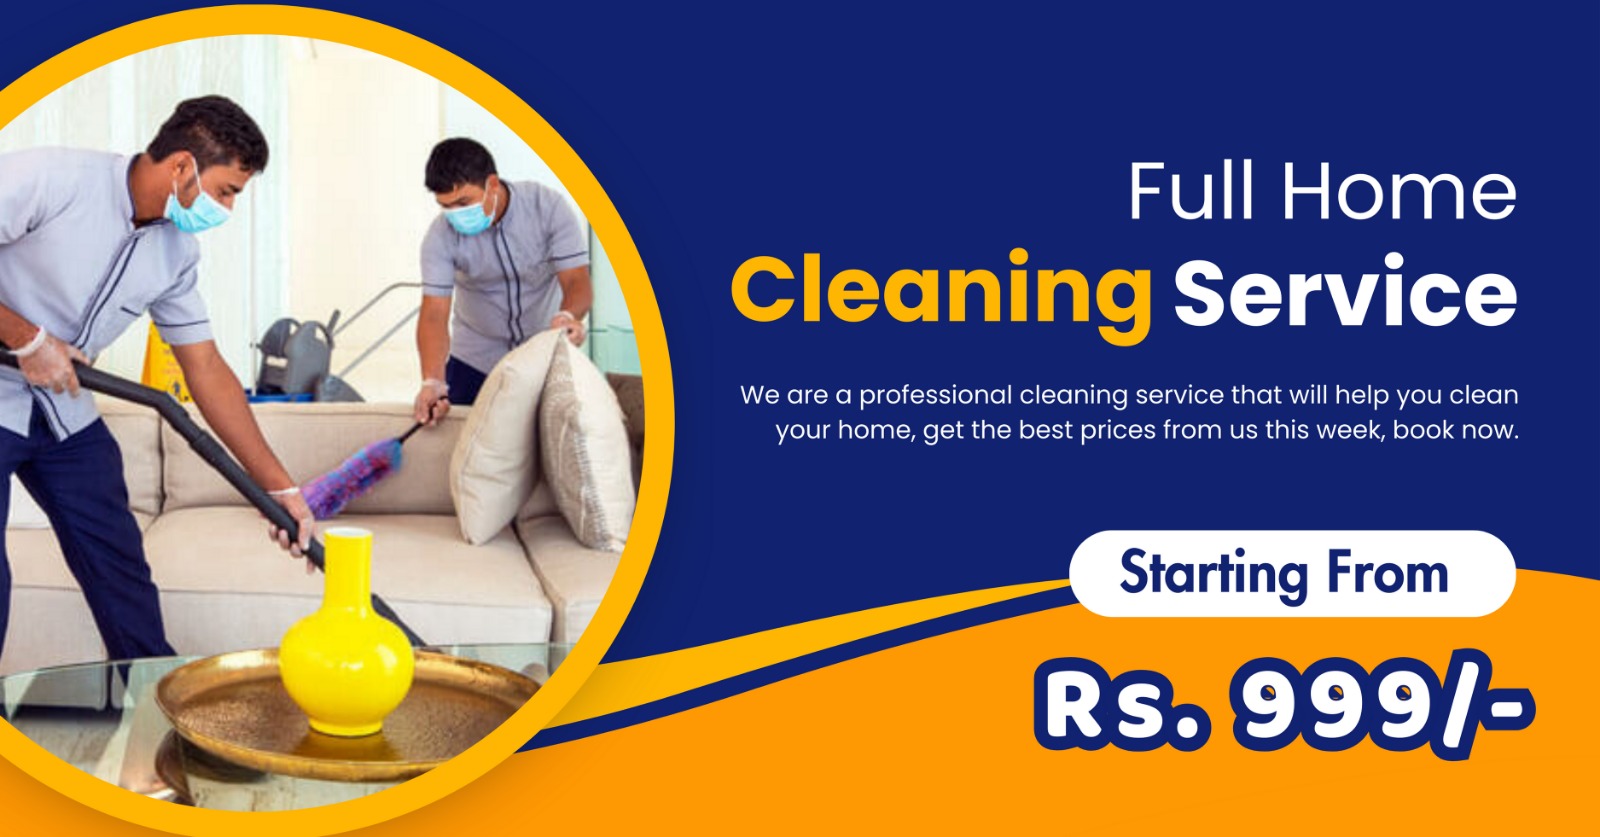 Bathroom Cleaning Service & Toilet Cleaning in Delhi NCR